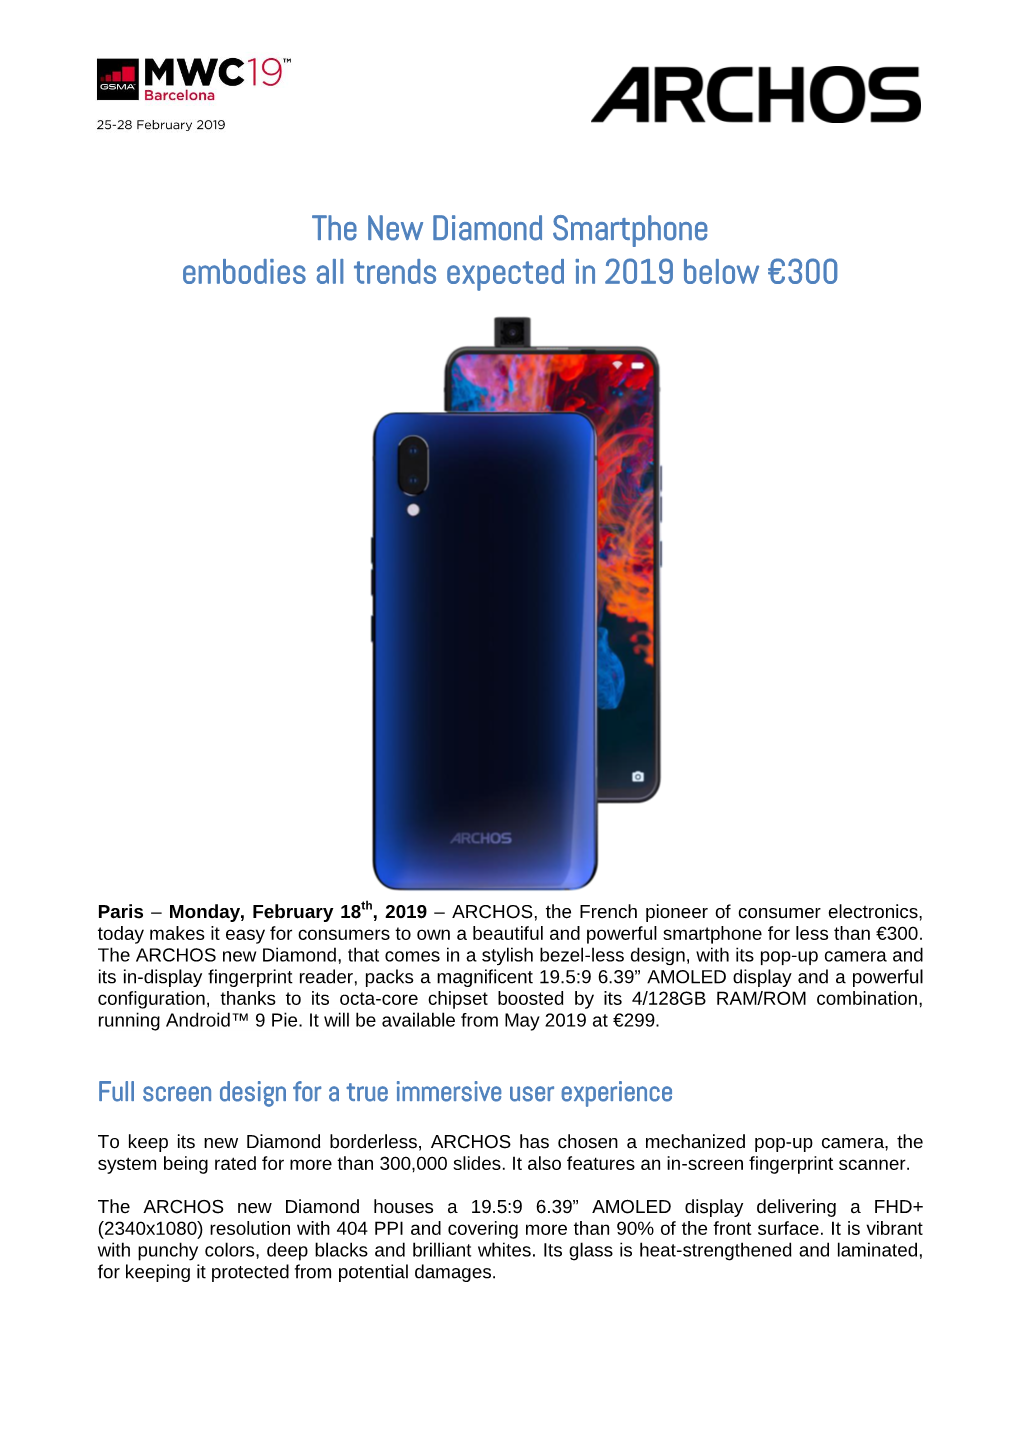 The New Diamond Smartphone Embodies All Trends Expected in 2019 Below €300